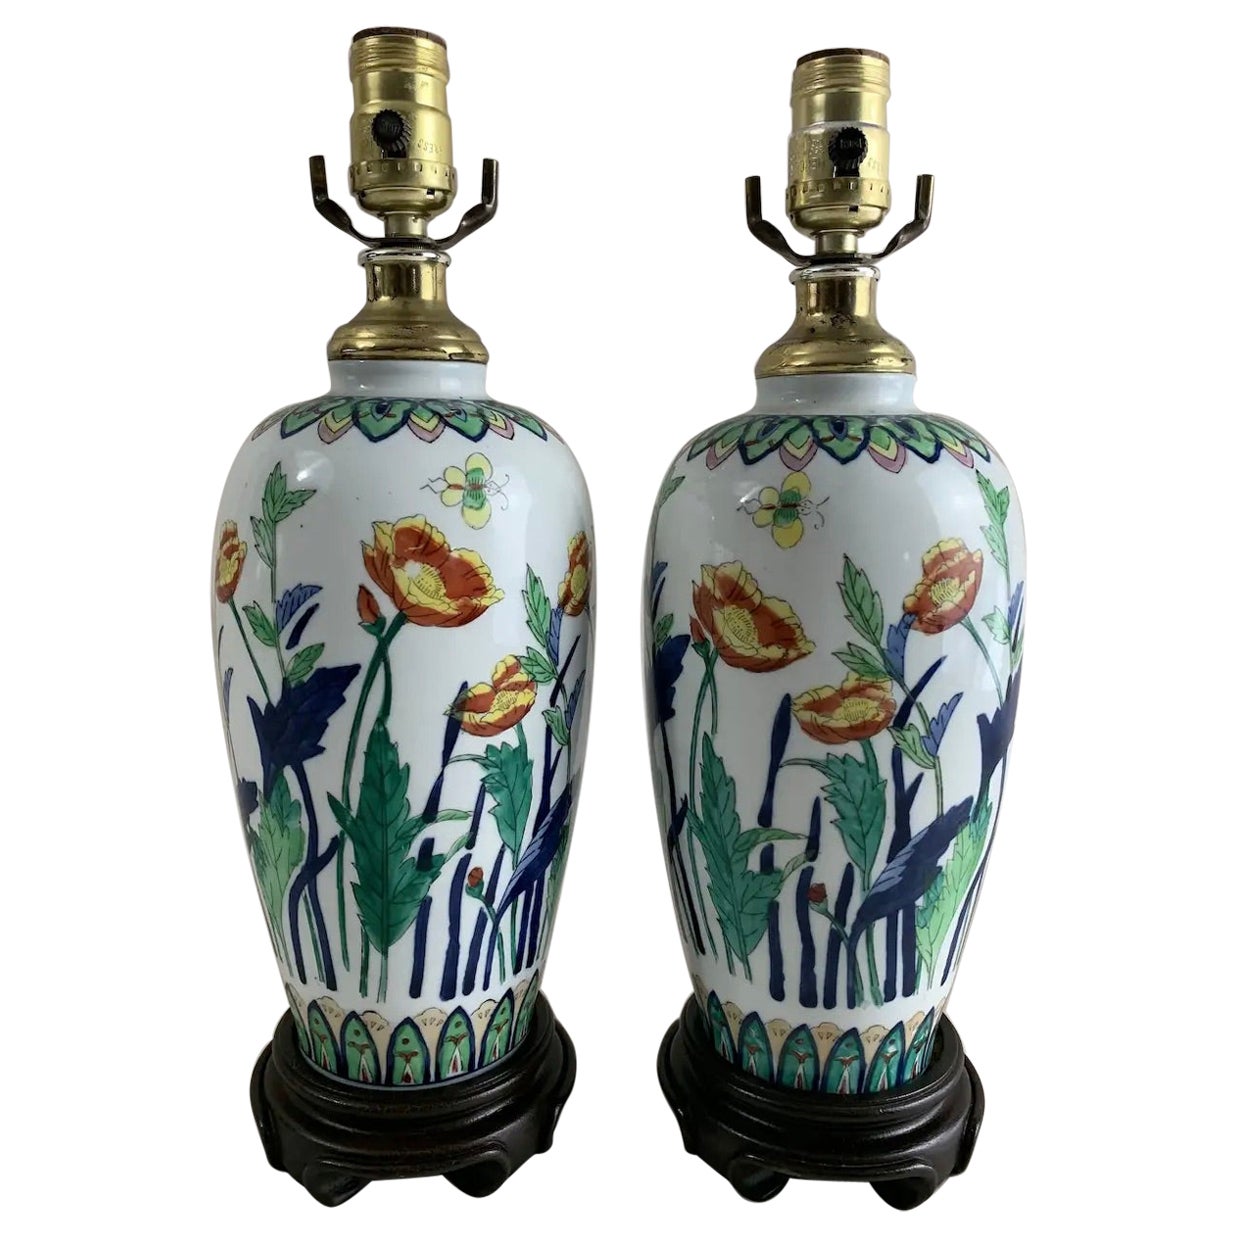 Butterflies & Poppies Hand Painted Thai Porcelain Table Lamps - 2 pc For Sale